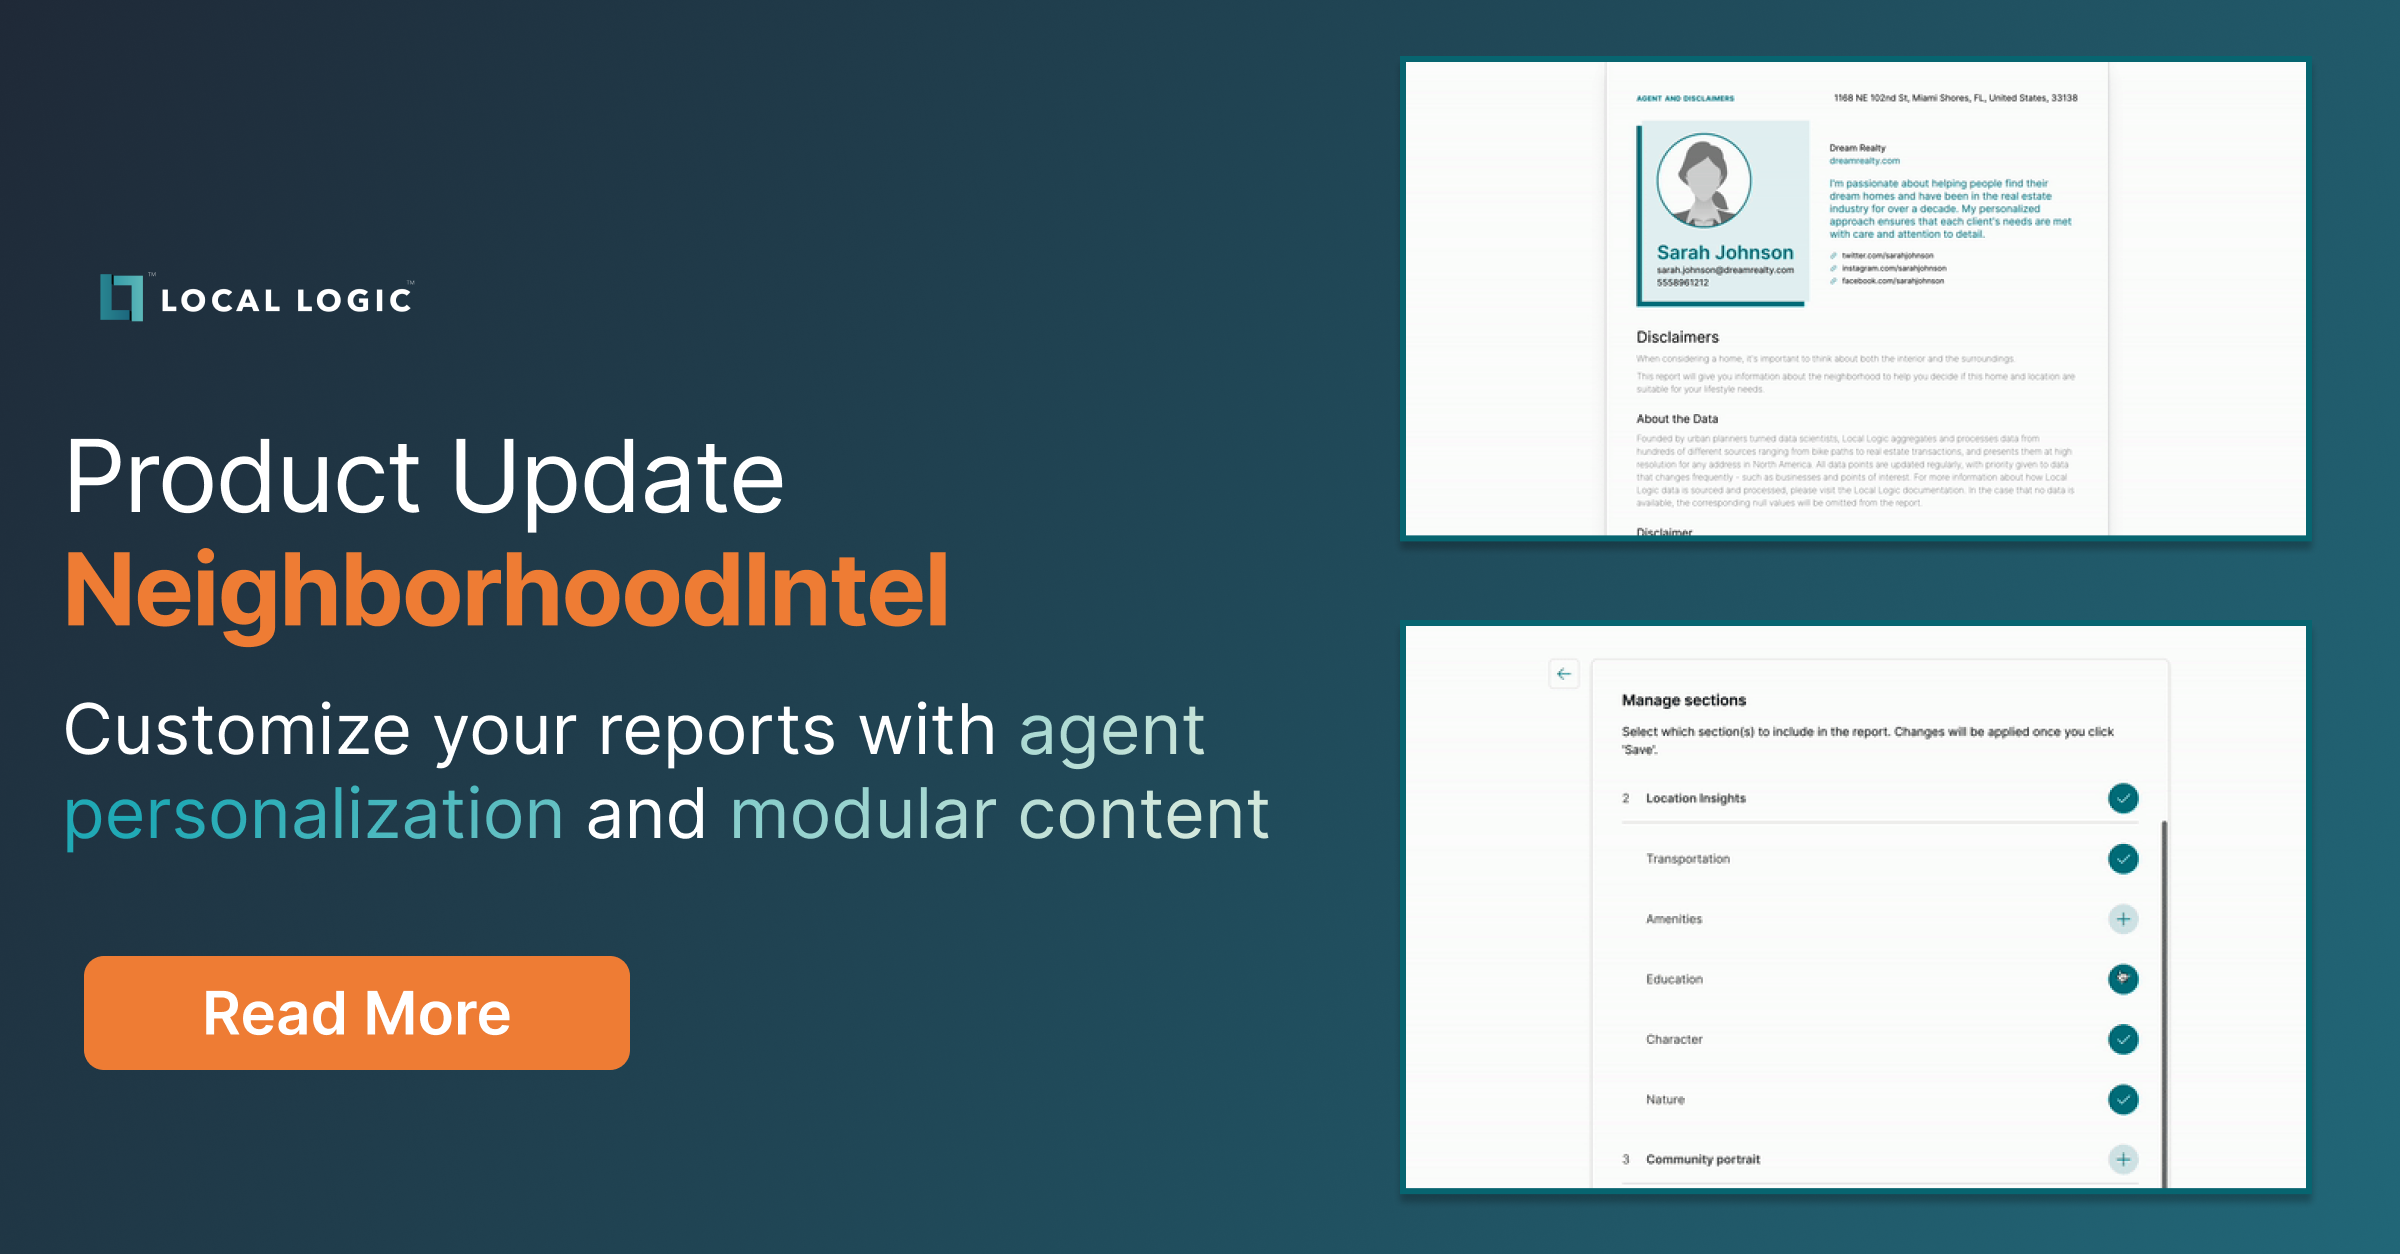 Local Logic logo on top of text "Product Update NeighborhoodIntel Customize your reports with agent personalization and modular content" Next to it is screenshot of the two new features of the NeighborhoodIntel report (agent personalization and report customization)